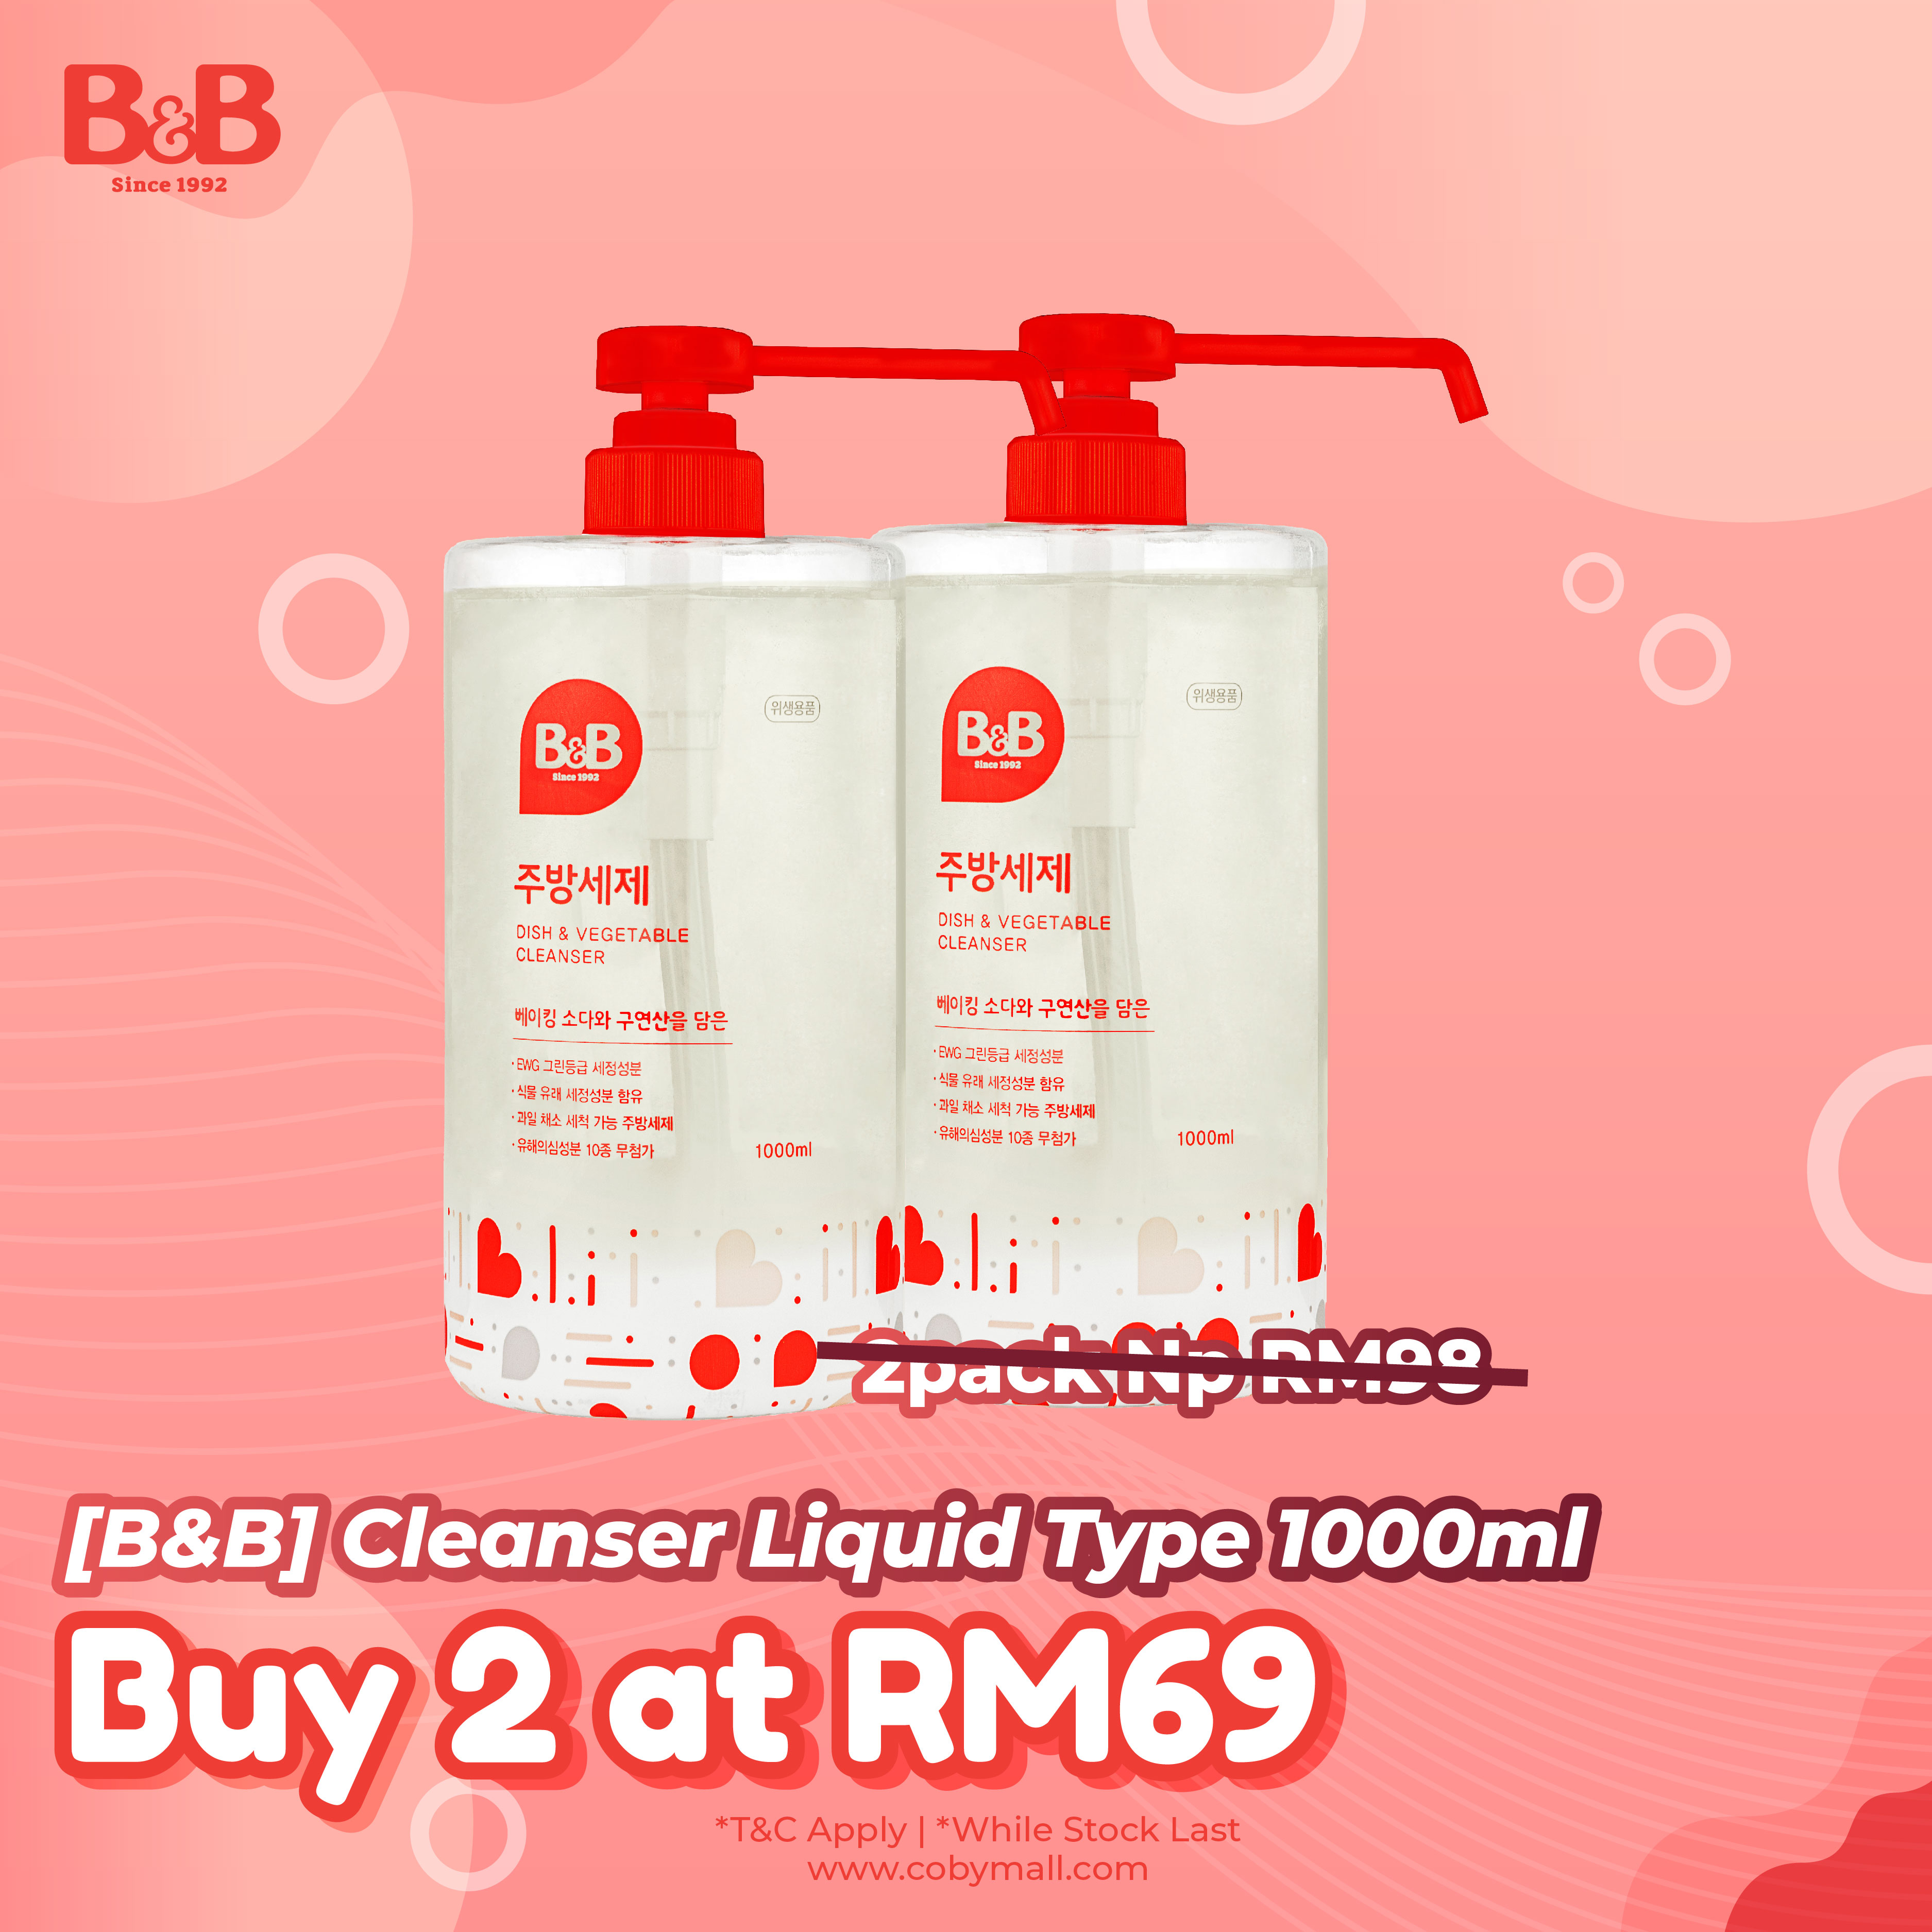 [B&B] Brand Day Sales Dish and Vegetable Cleanser Liquid Type 1000ml x2